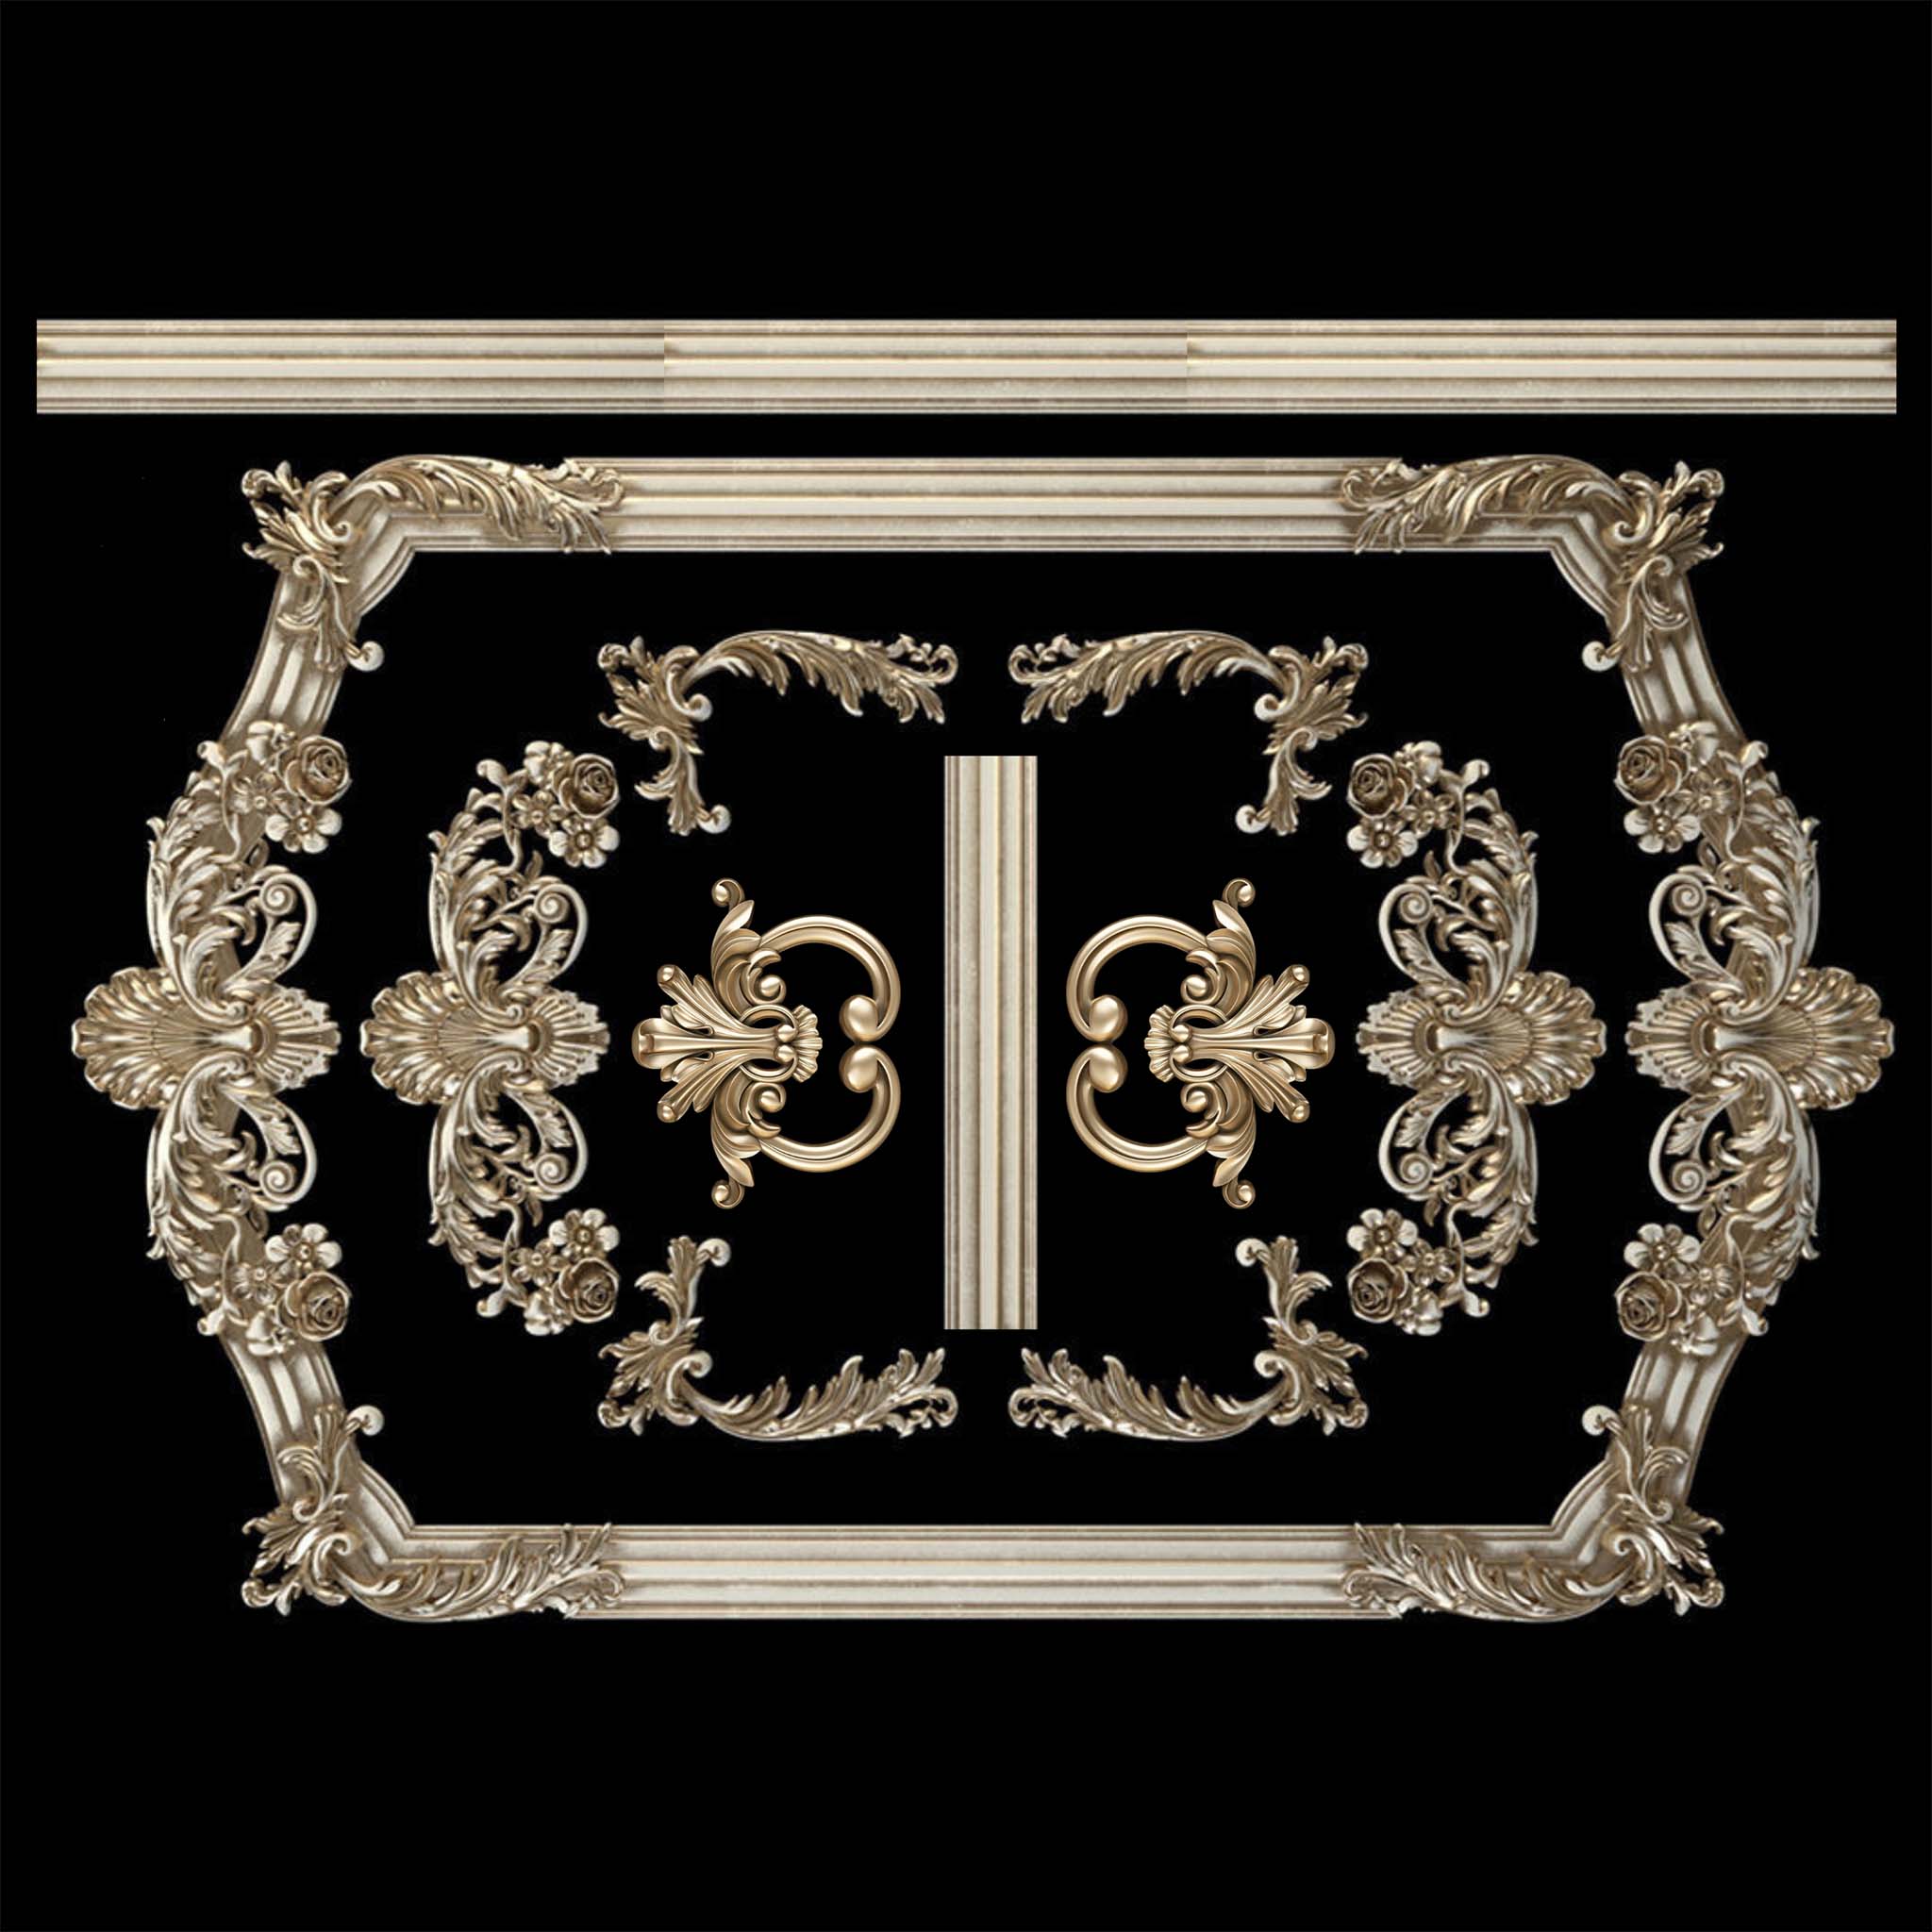 Gold-colored silicone mold castings of ornate frames and accent pieces are against a black background.